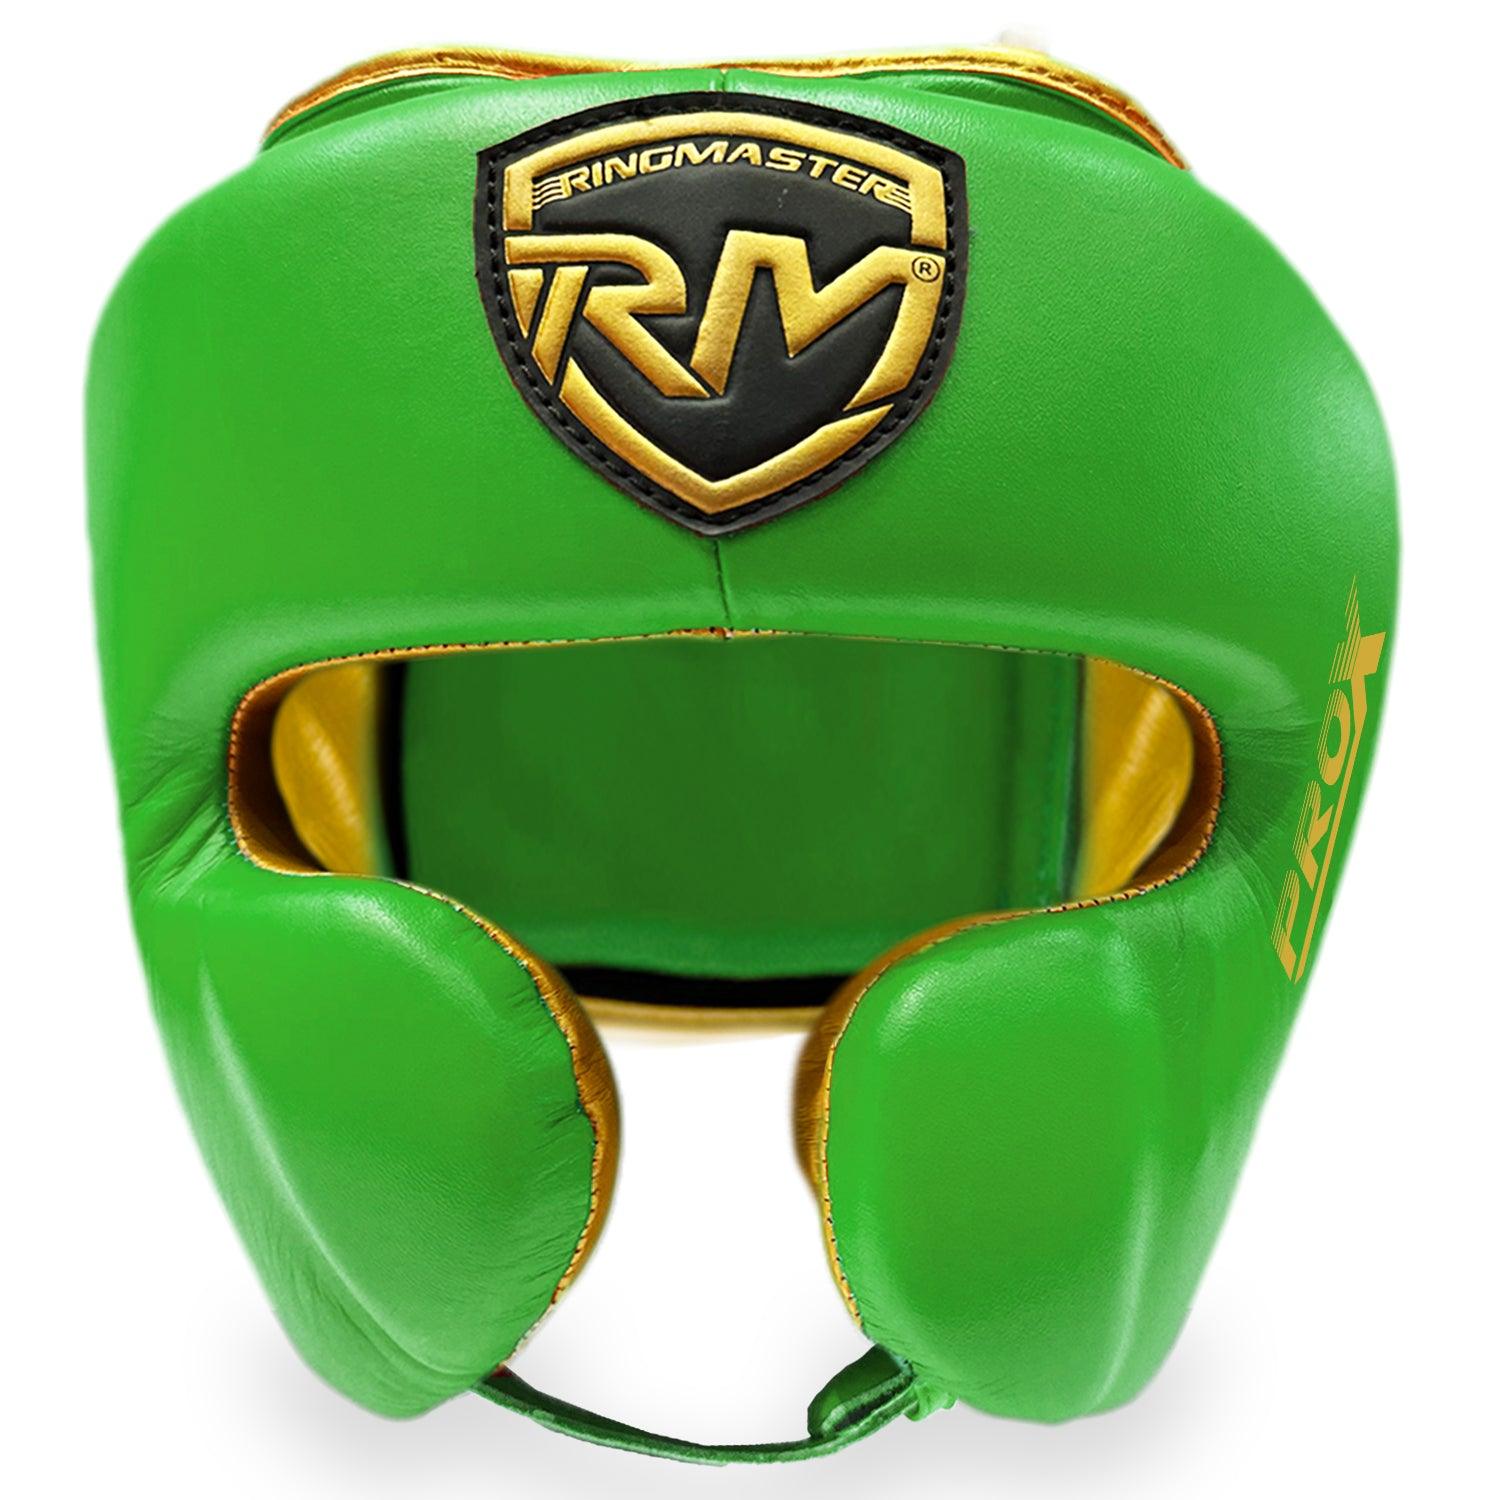 Head guard Boxing, Best boxing head guard, boxing head guard uk, boxing head guard junior, boxing head guard kids, boxing head guard open face, Boxing head guard for sale, face guard boxing, boxing headgear, chin cheek head guard,  Head guard Boxing Green and Gold, Ringmaster Sports Head guard, Ringmaster Sports Equipment, Ringmaster boxing Equipment